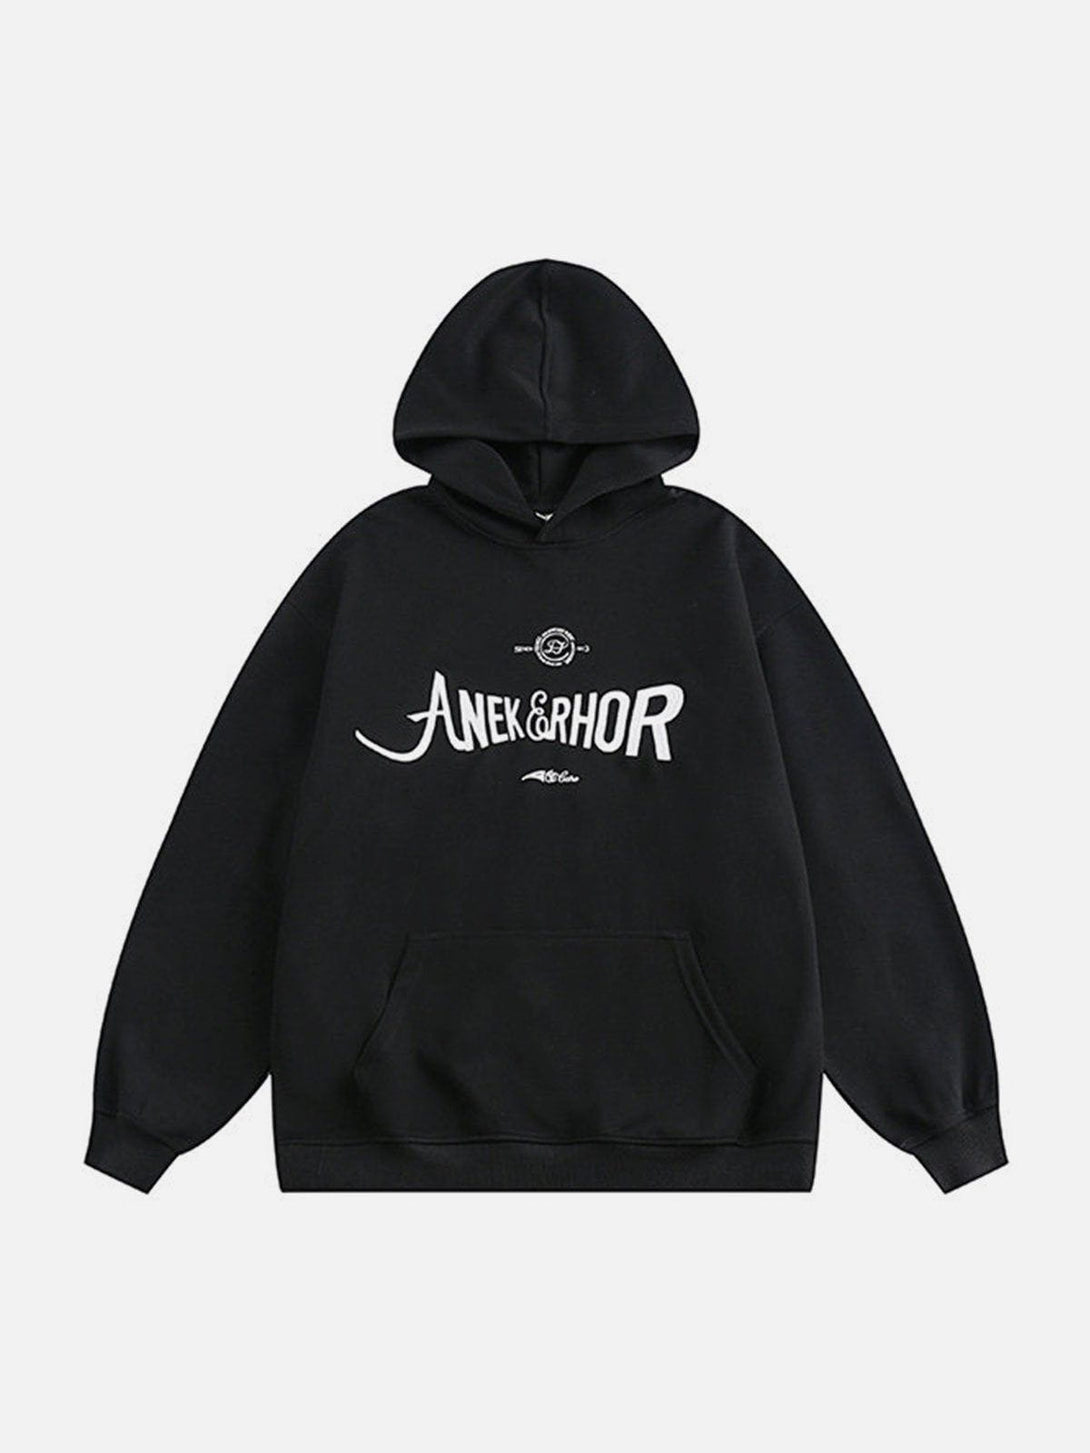 Levefly - Letter Embroidery Solid Hoodie - Streetwear Fashion - levefly.com